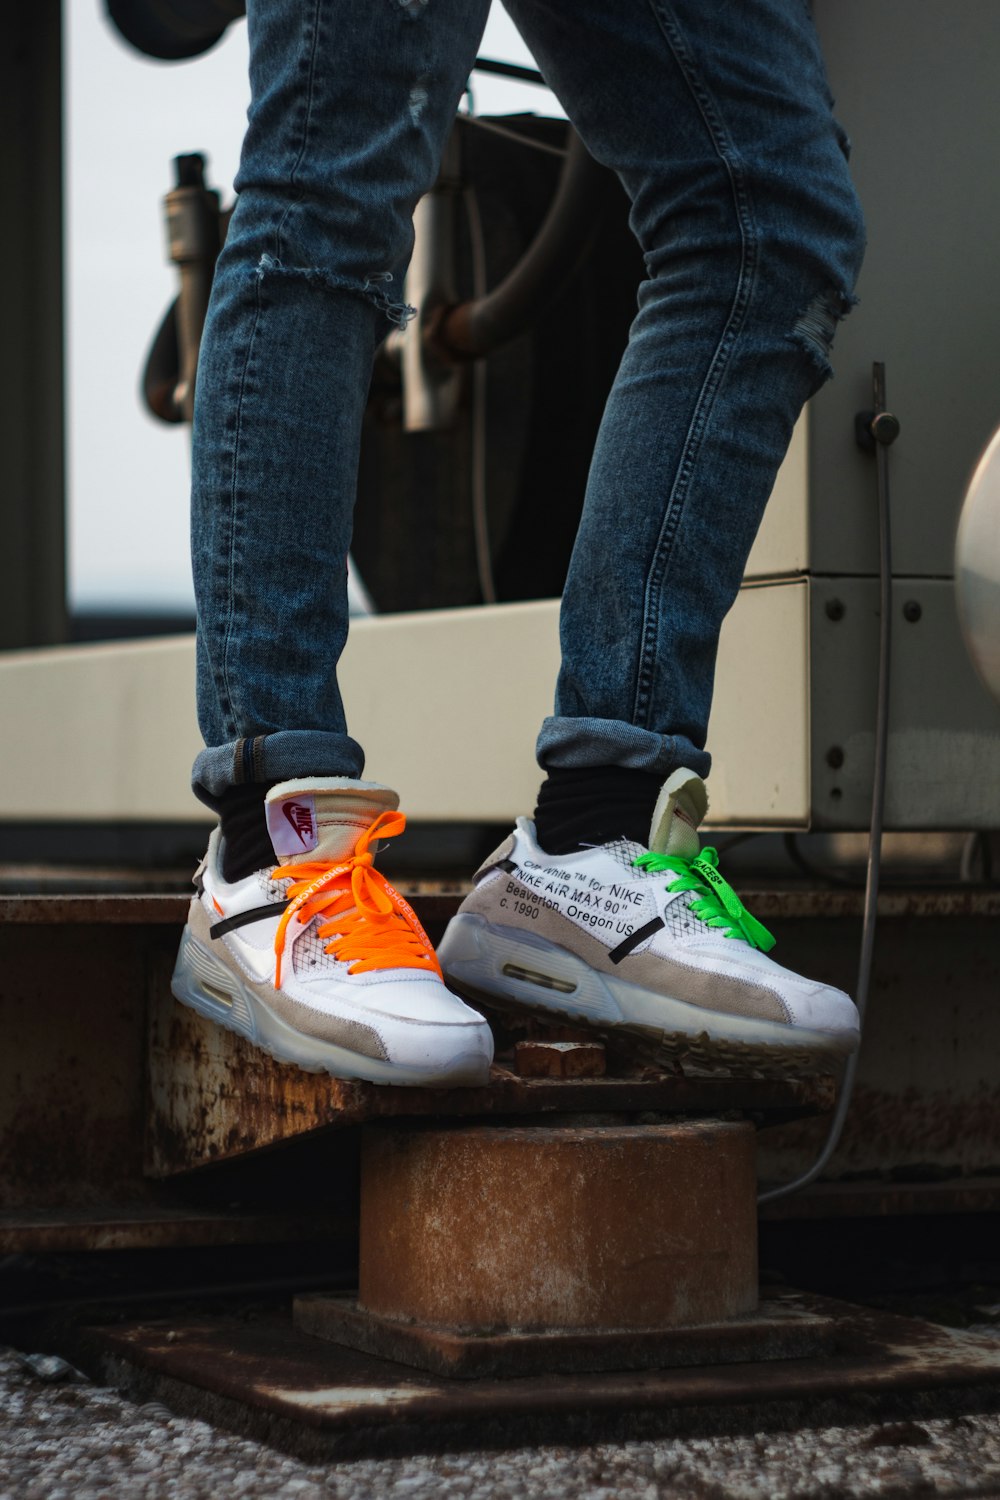 Person wearing blue denim jeans and white and orange nike athletic shoes  photo – Free Airmax Image on Unsplash